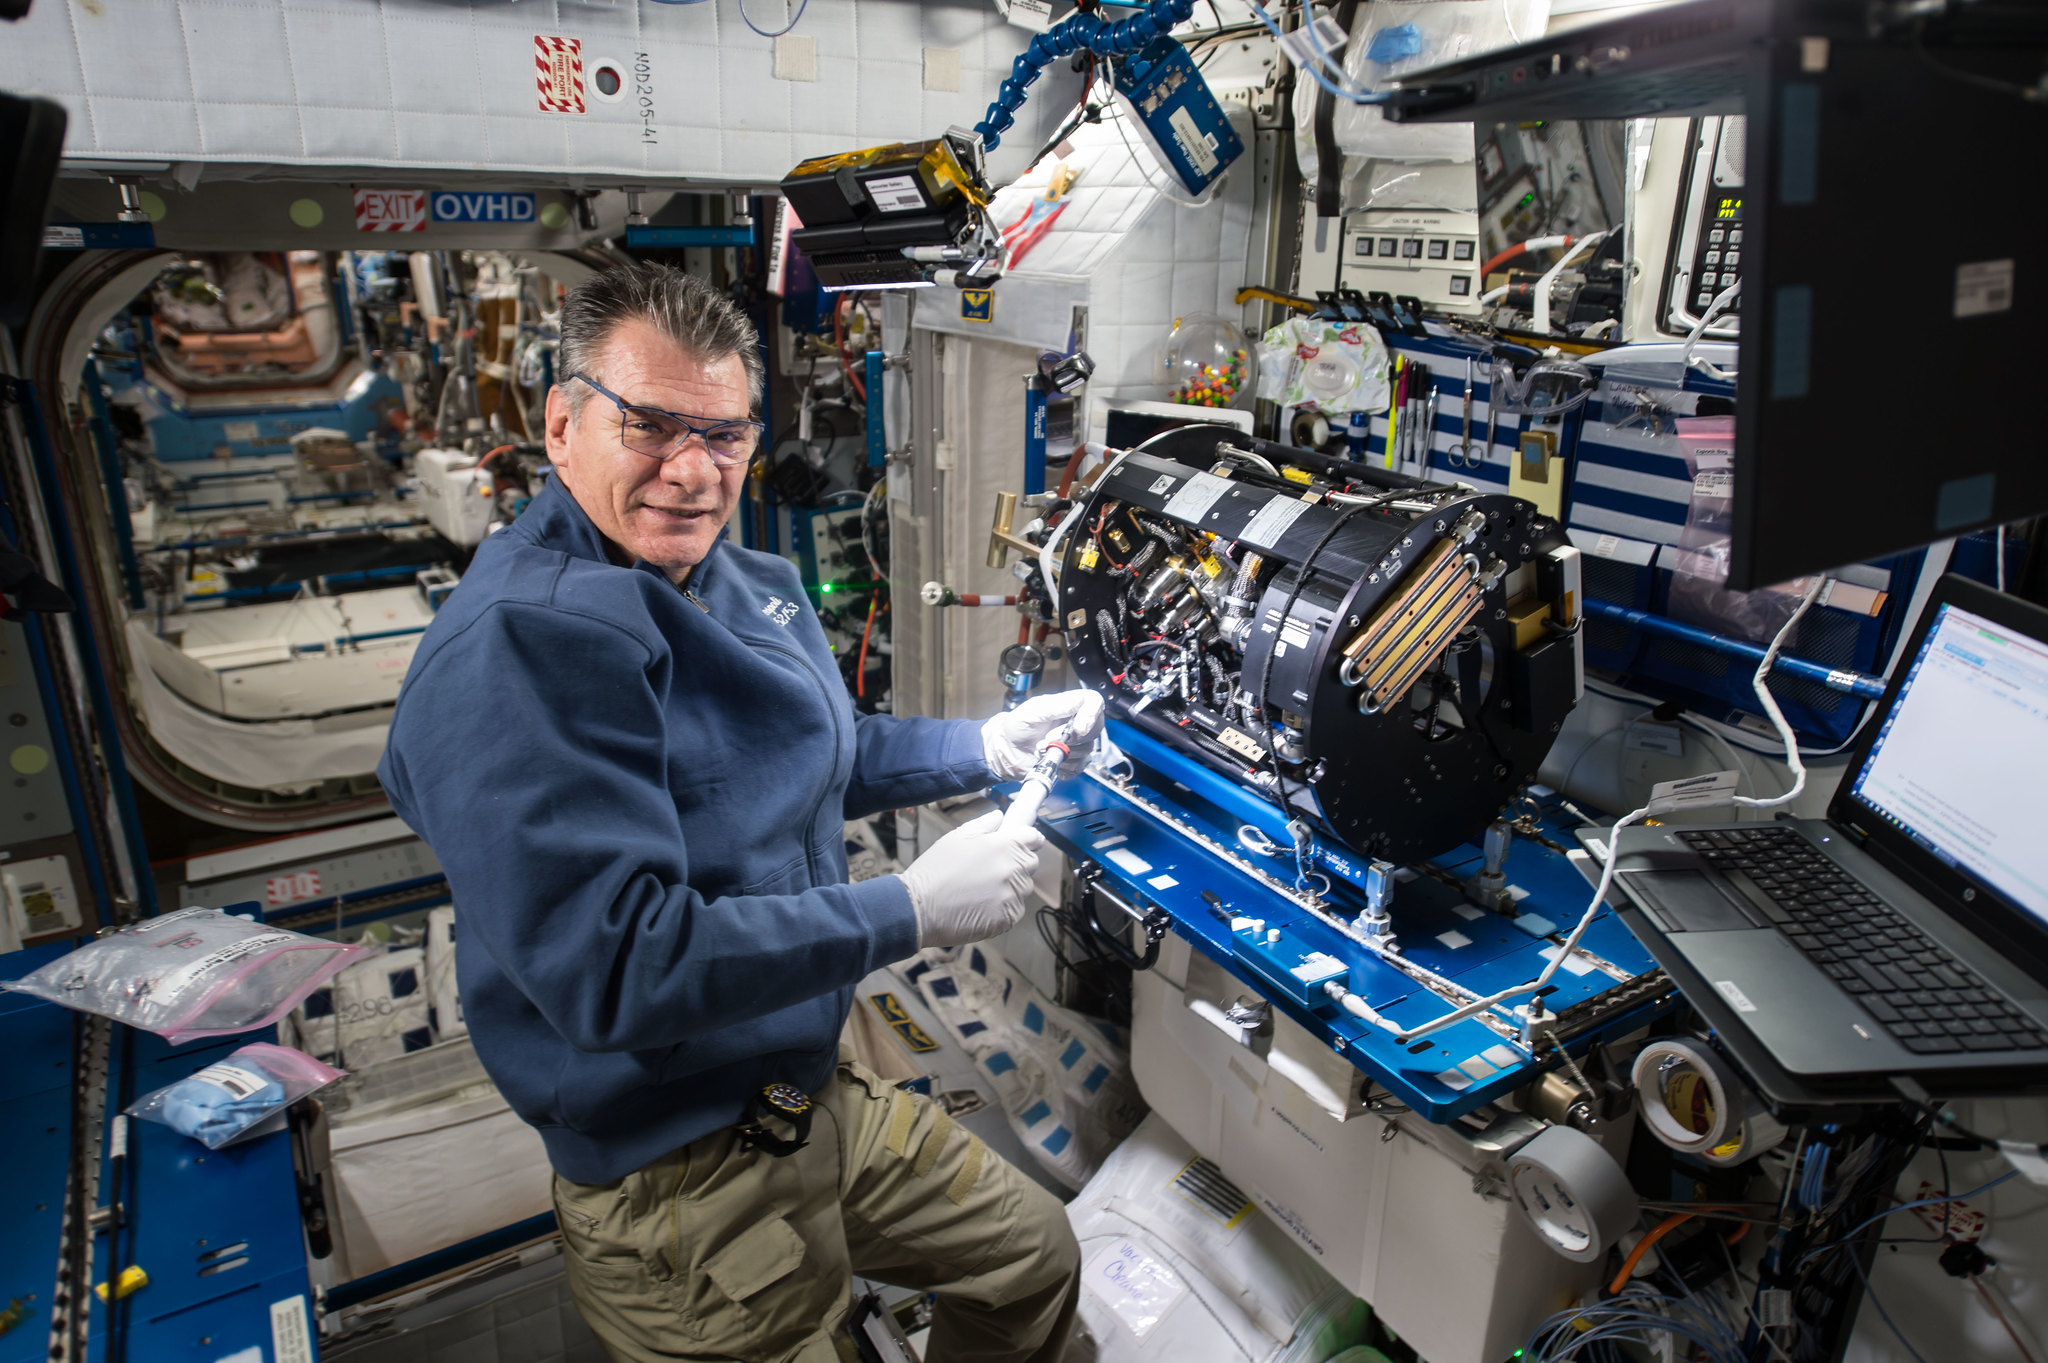 Advanced Combustion via Microgravity Experiments (ACME) operations